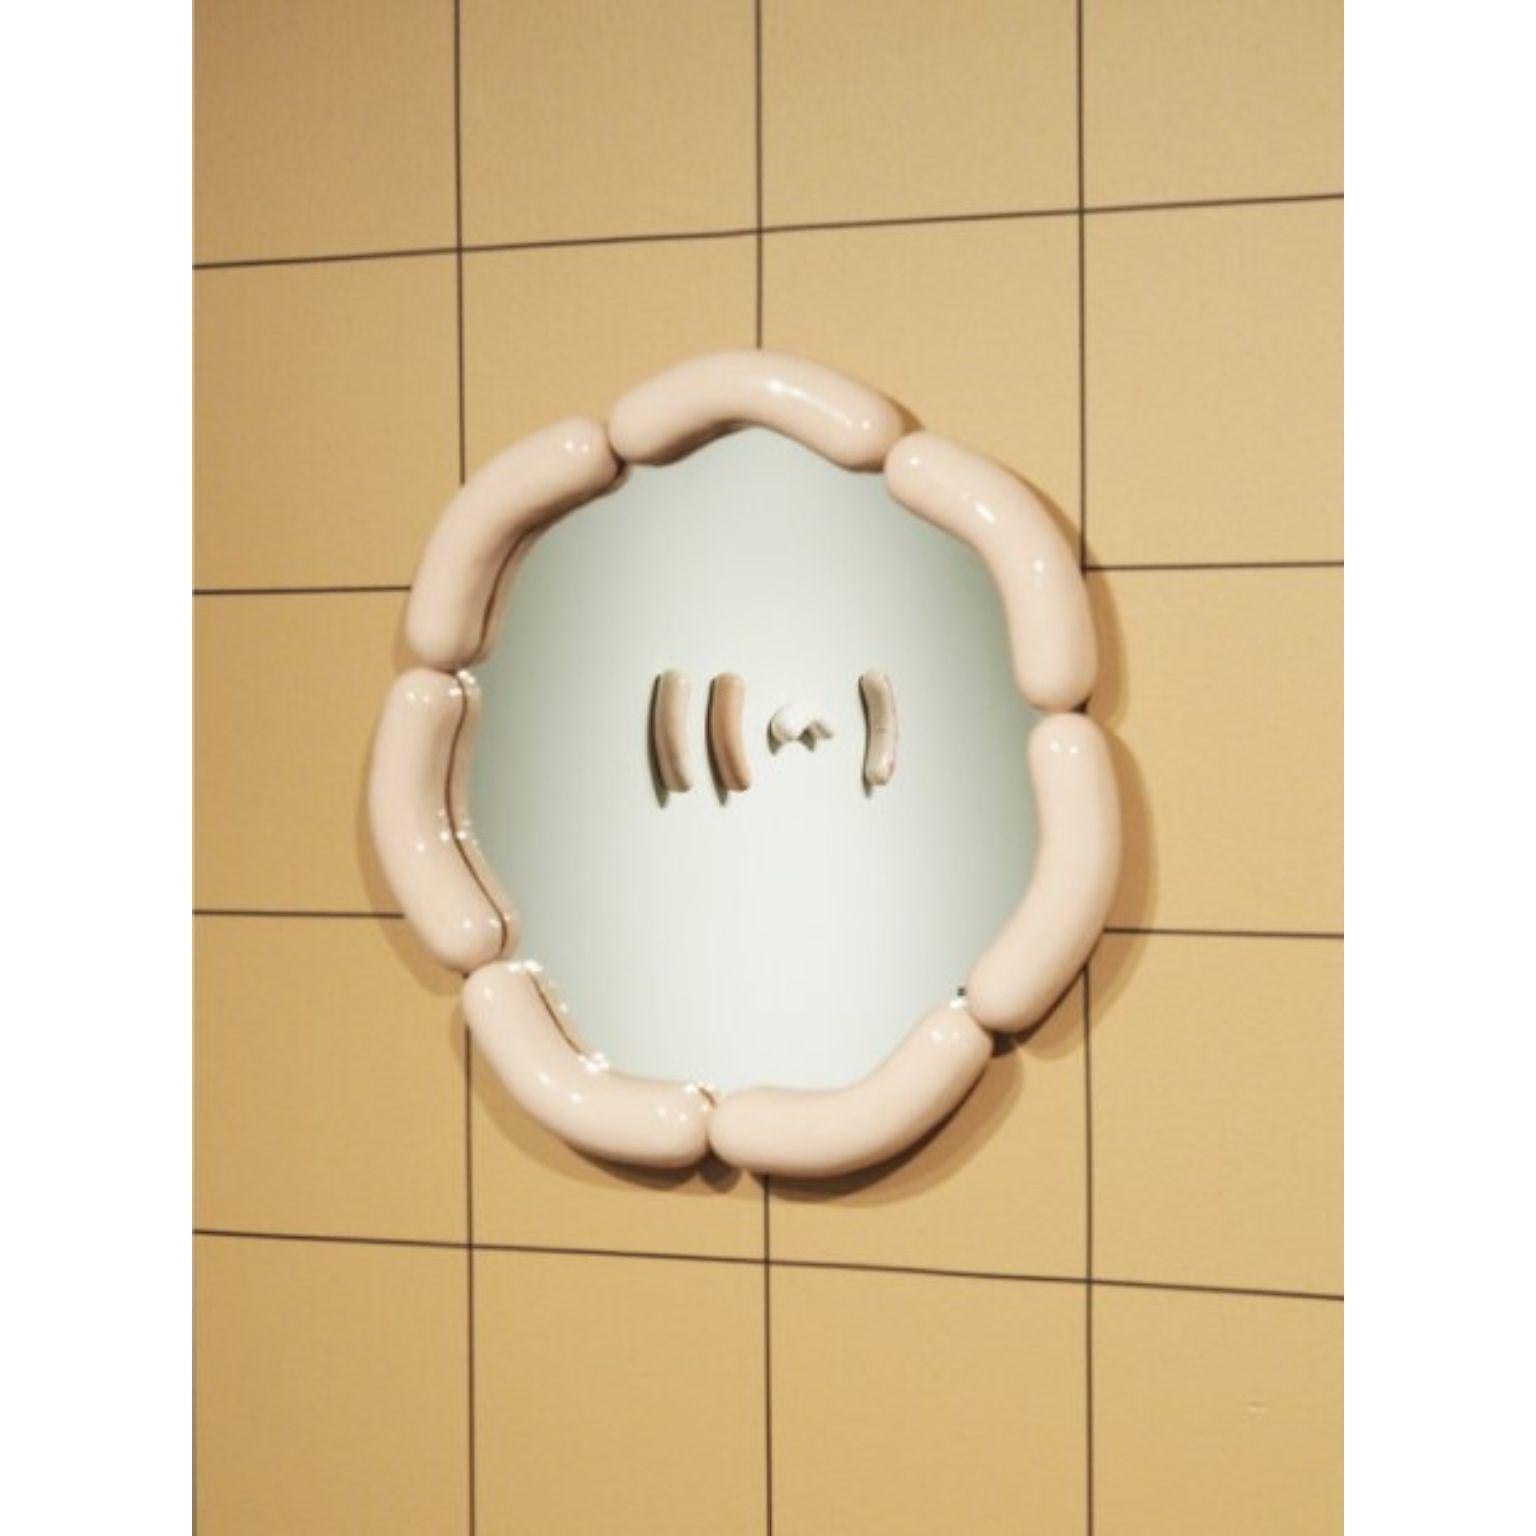 Wurstie mirror by Tero Kuitunen
Material: hand built ceramic, glass mirror, wood
Dimensions: D 49 x W 49 x H 5 cm
Numbered and signed.

Ceramic wall mirror, numbered. Open edition.

Designer Tero Kuitunen, b. 1986, is inspired by the